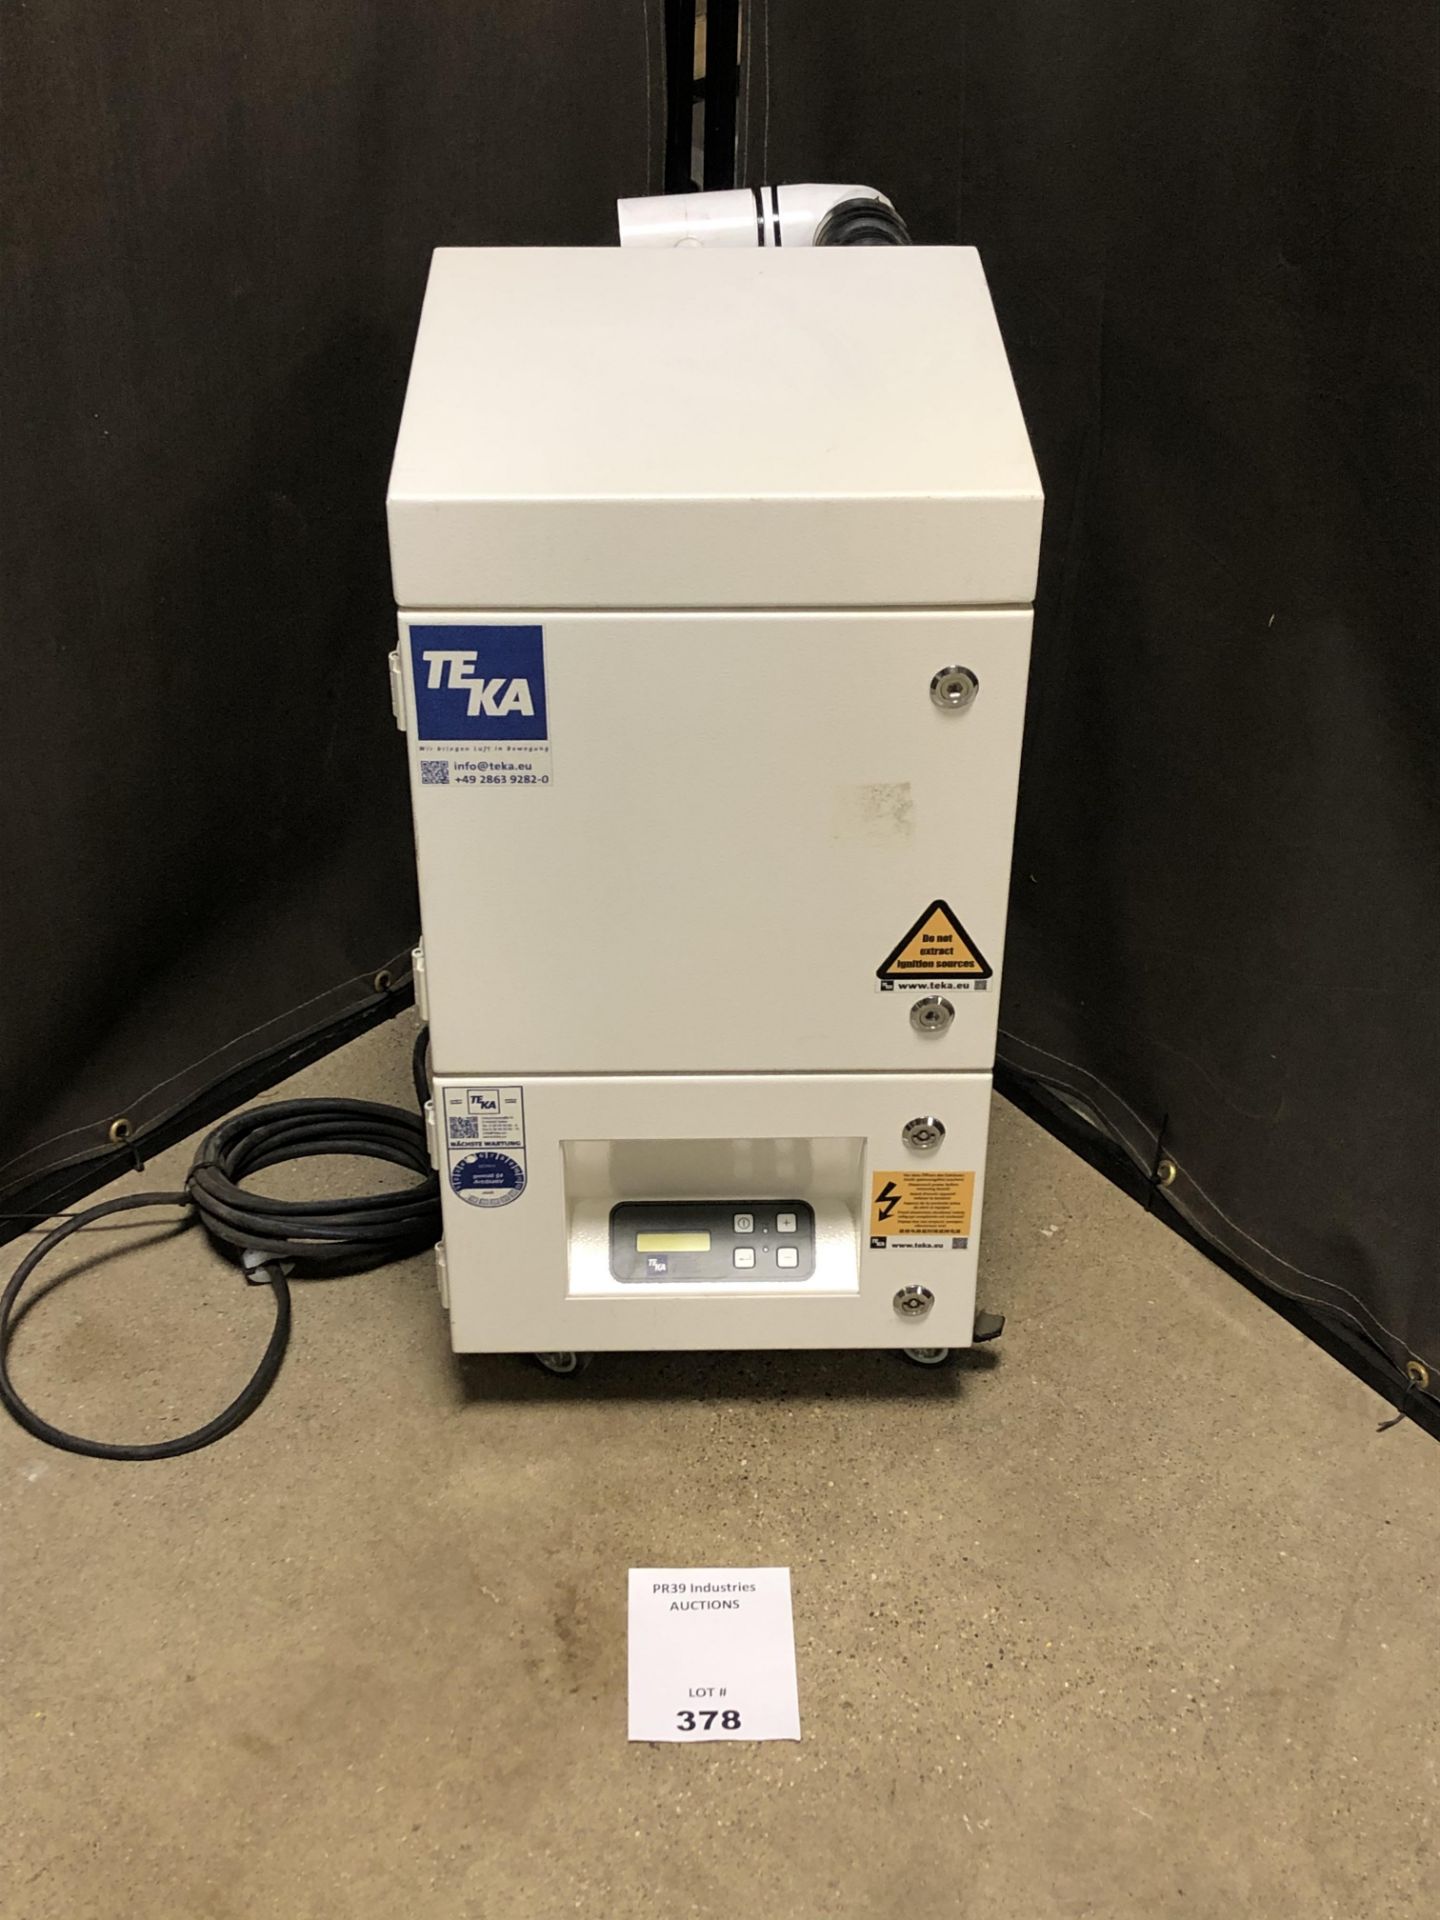 TEKA LMD-508 PORTABLE FUME AND PARTICLE EXTRACTOR, 190 MAX CFM, 21K Pa, EURO POWER CORD (EASY CONVER